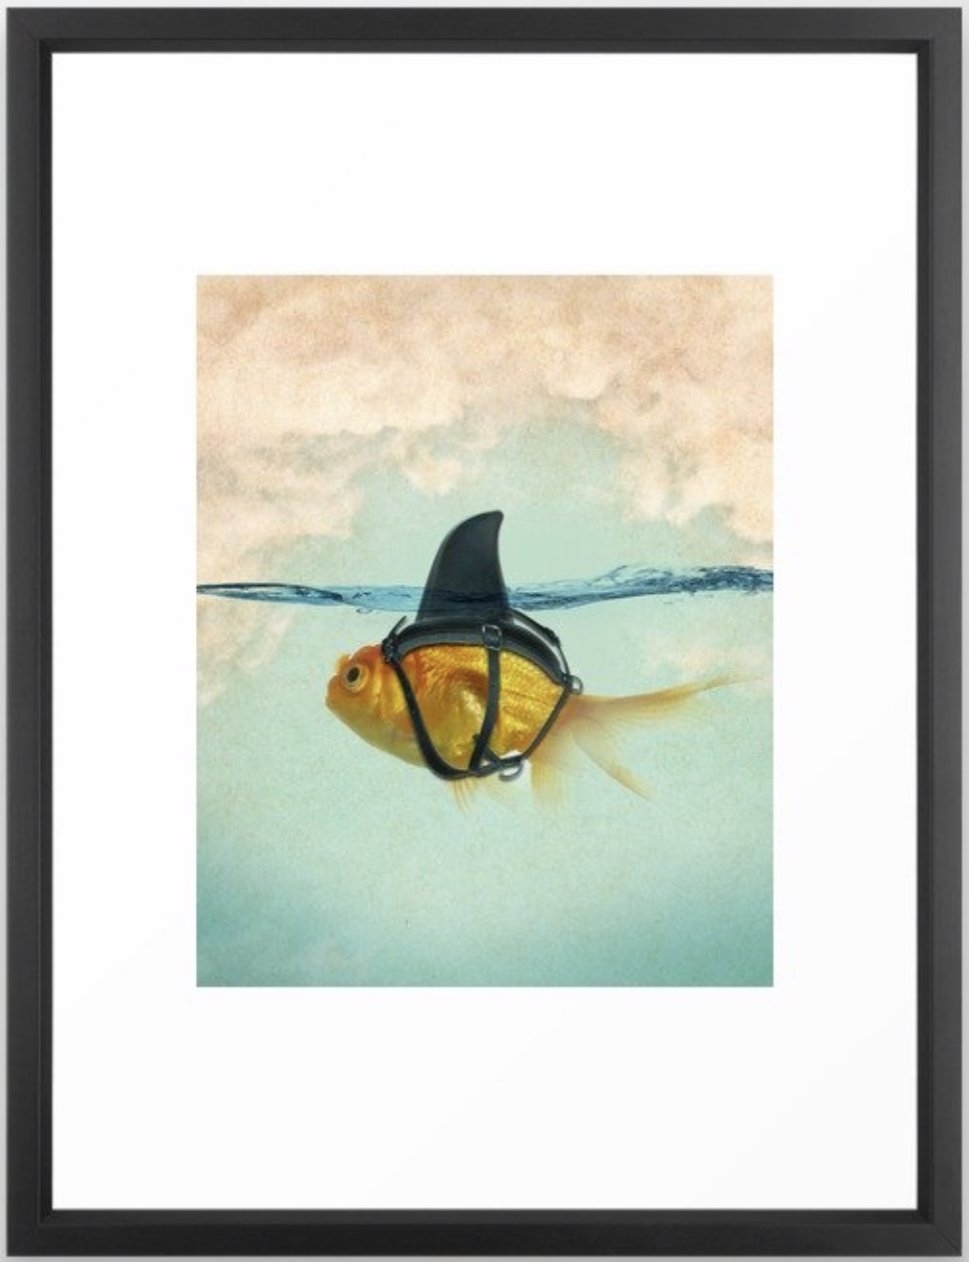 Brilliant DISGUISE - Goldfish with a Shark Fin Framed Art Print - Image 0